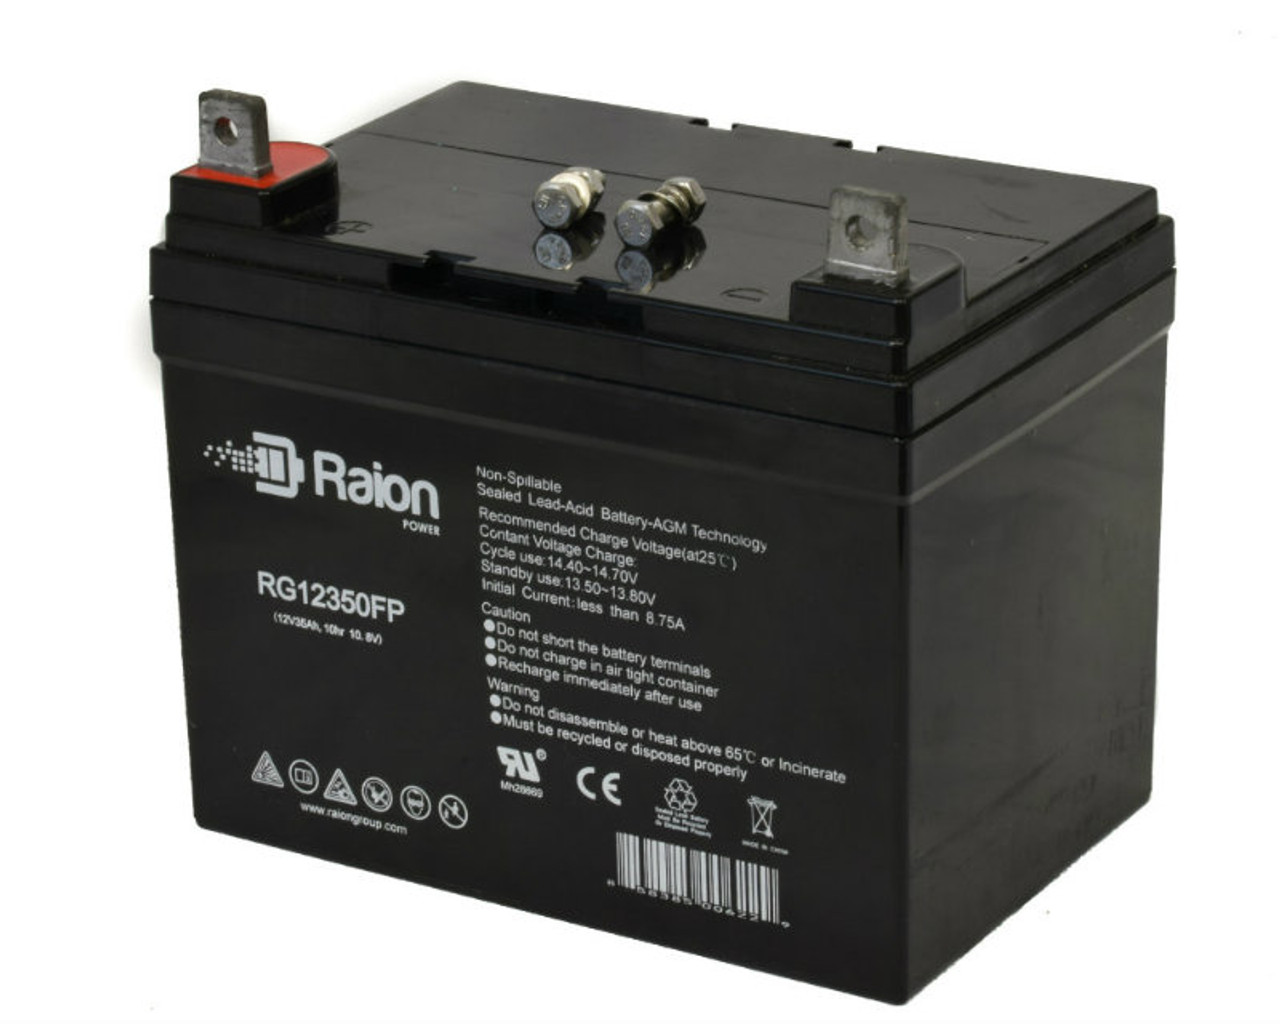 Raion Power Replacement 12V 35Ah RG12350FP Mobility Scooter Battery for Invacare Excell FWD CAPT